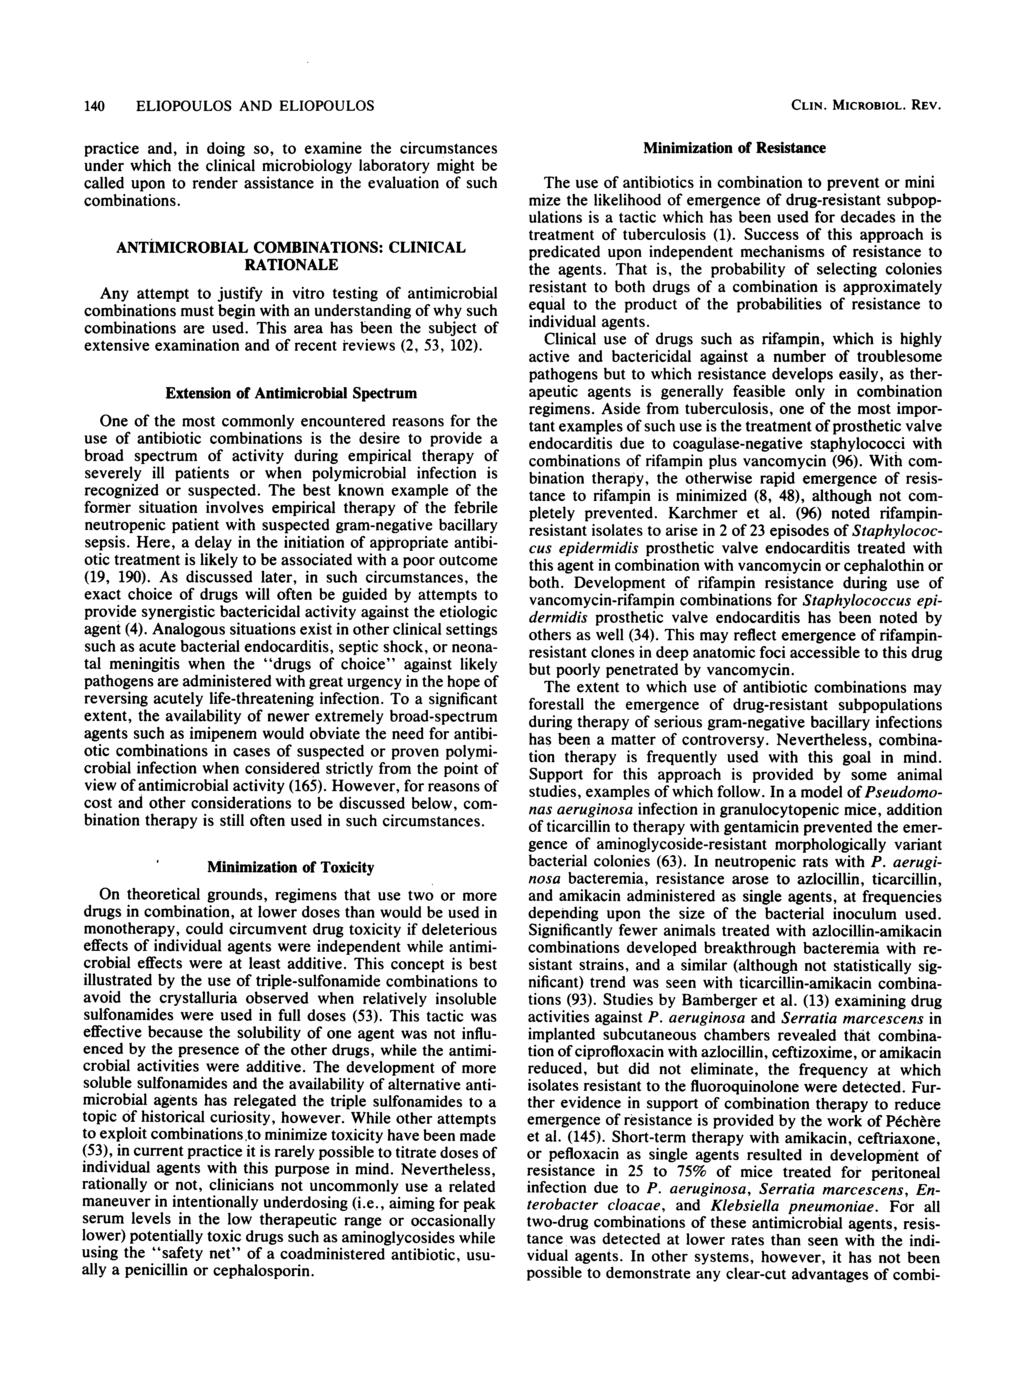 140 ELIOPOULOS AND ELIOPOULOS practice and, in doing so, to examine the circumstances under which the clinical microbiology laboratory might be called upon to render assistance in the evaluation of